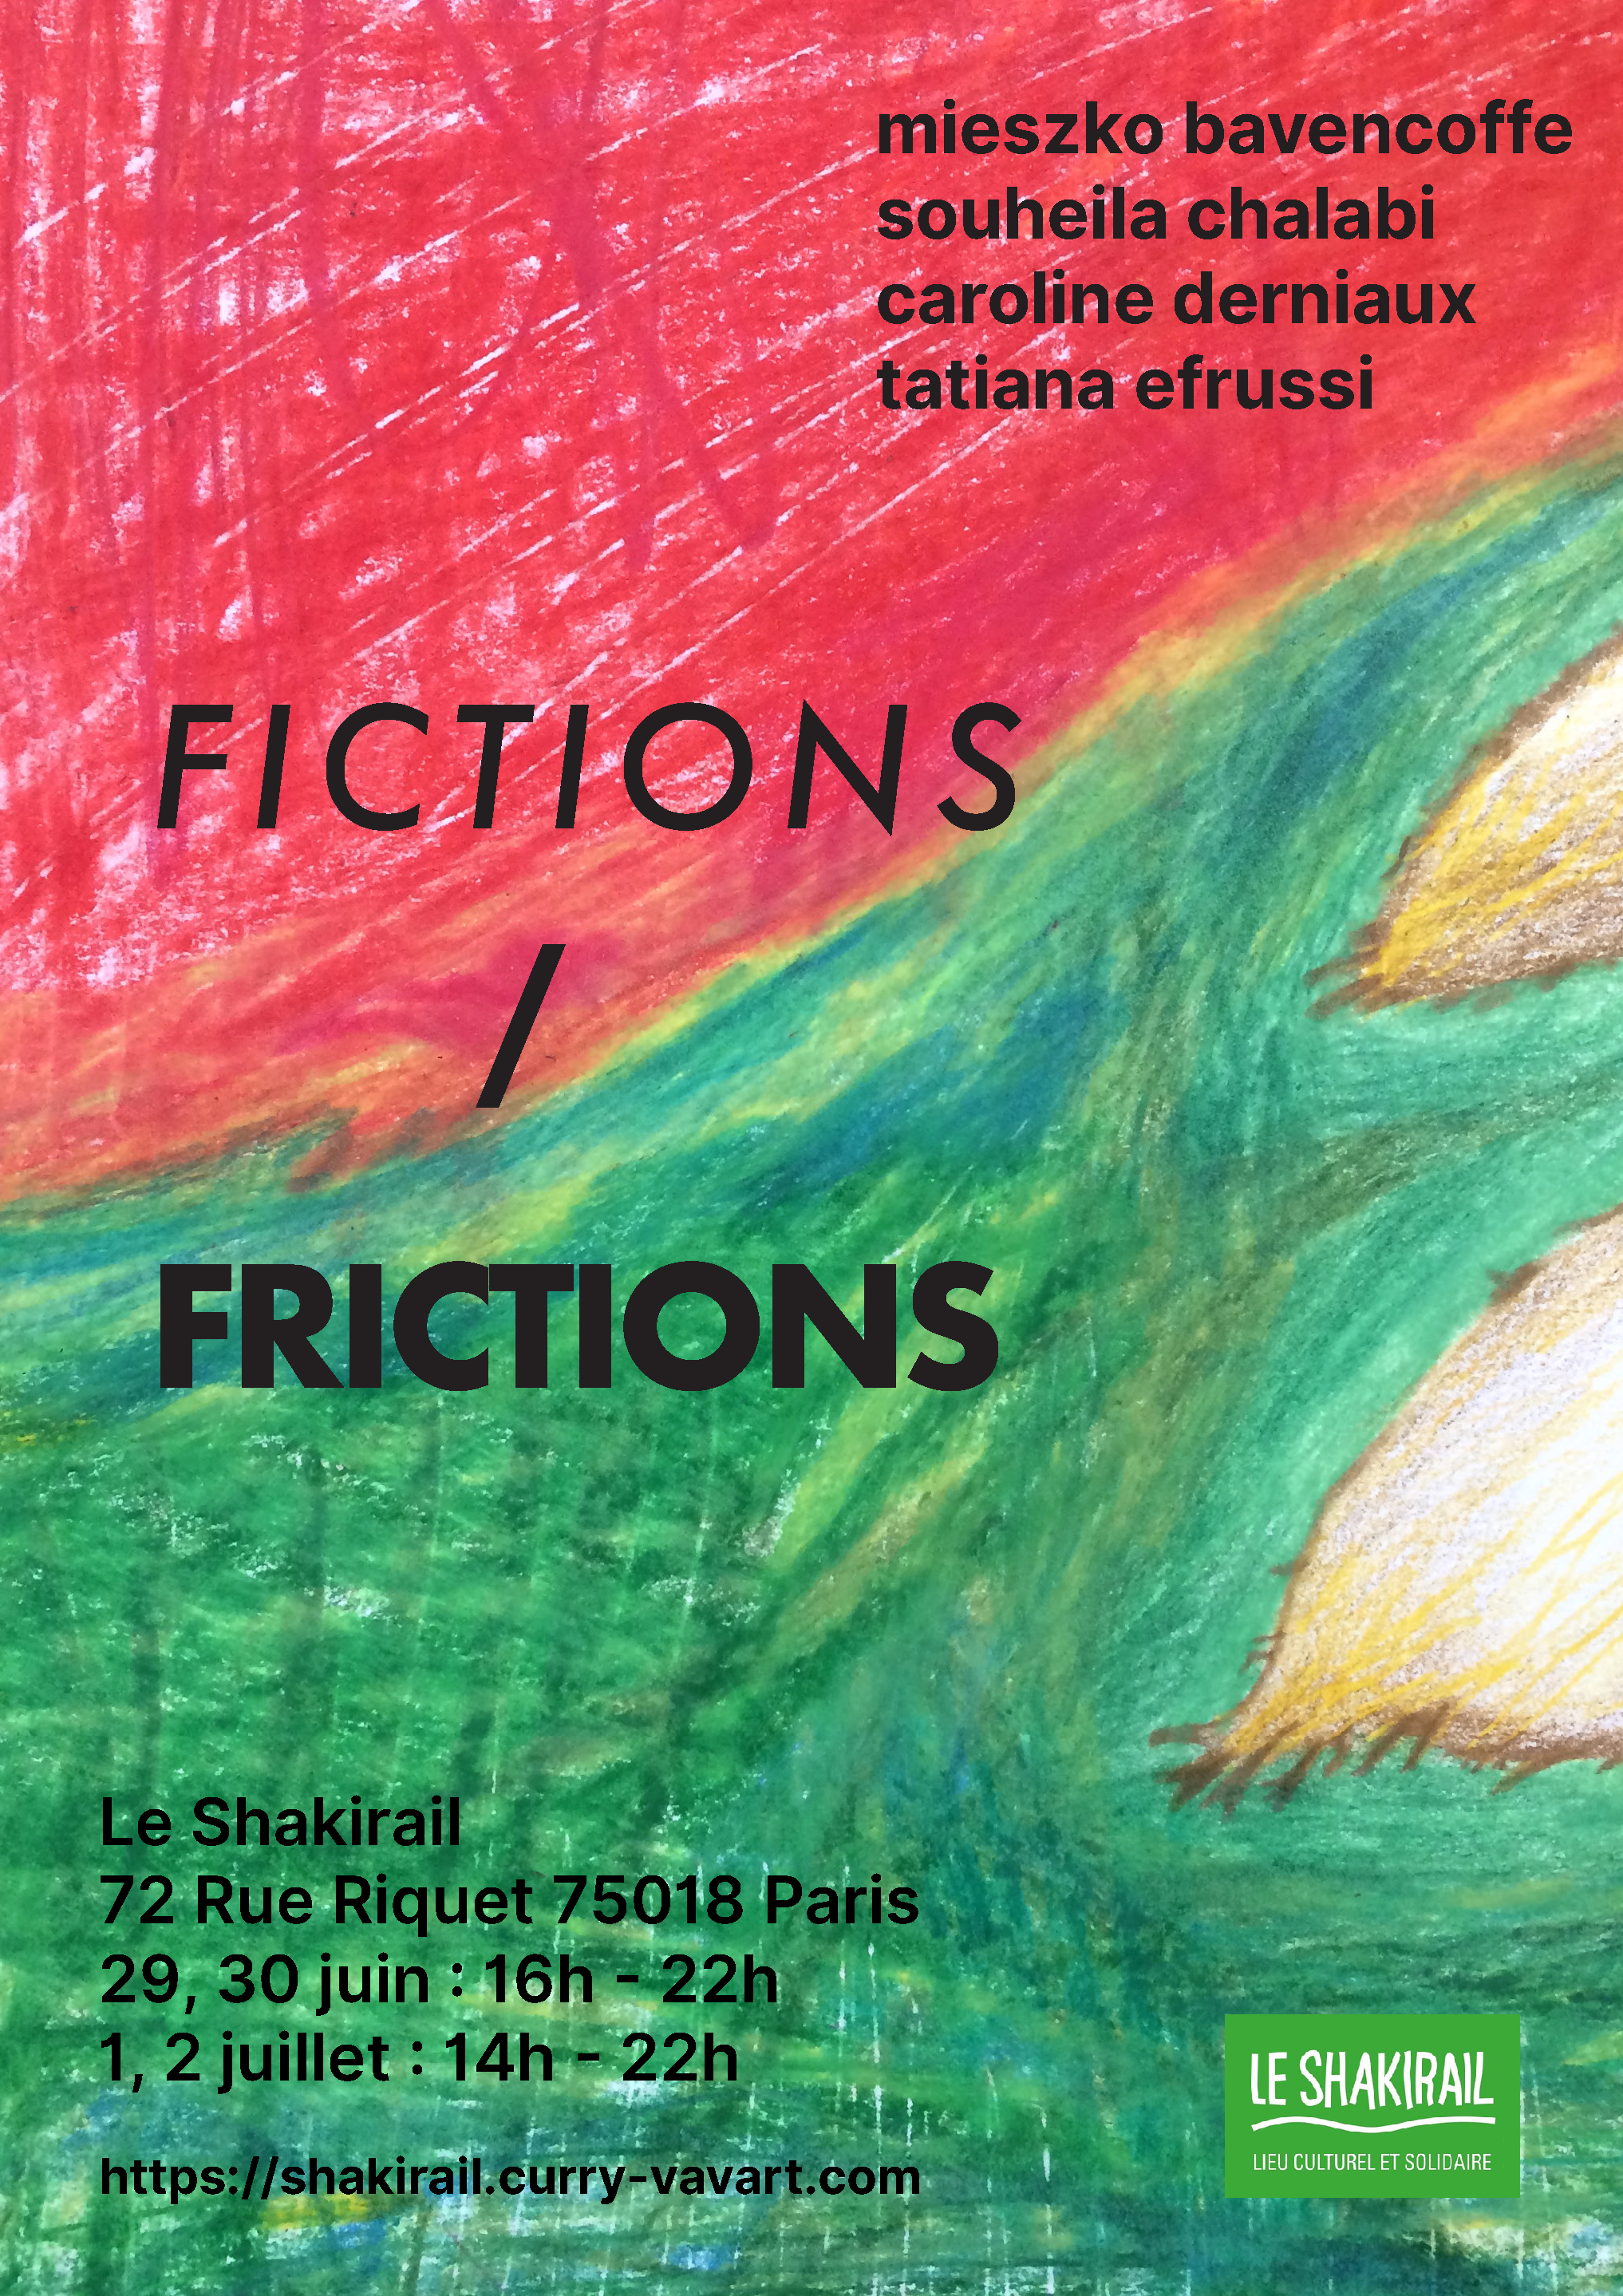 Fictions/frictions